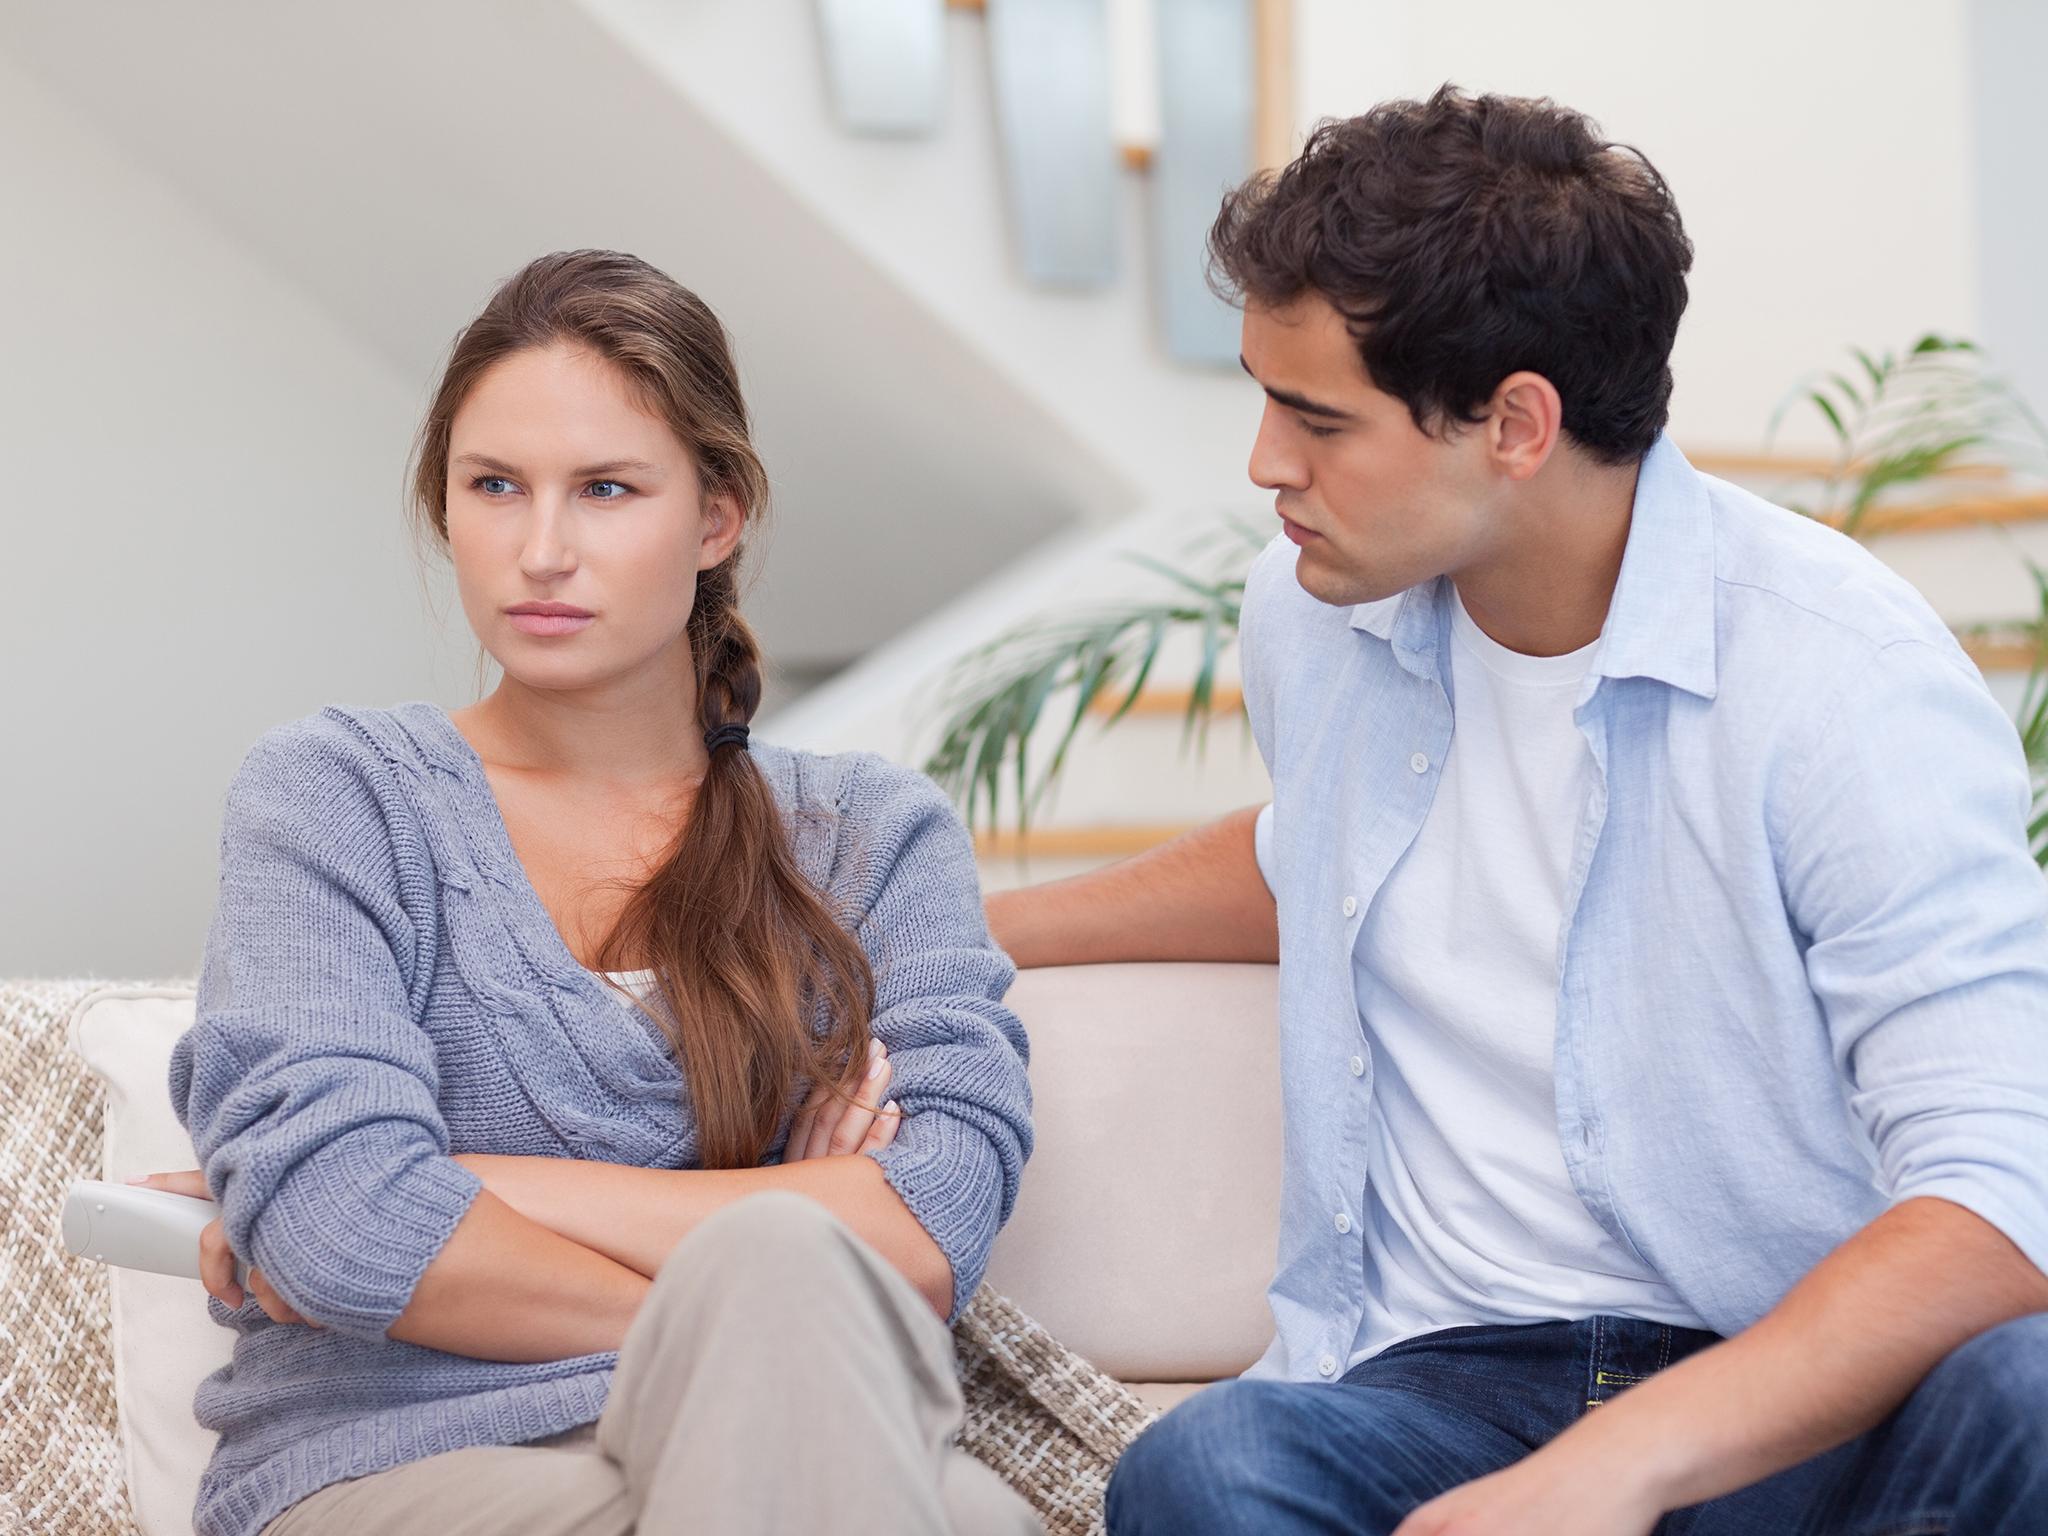 Relationship experts recommend couples re-evaluate the reasons they are together when problems arise